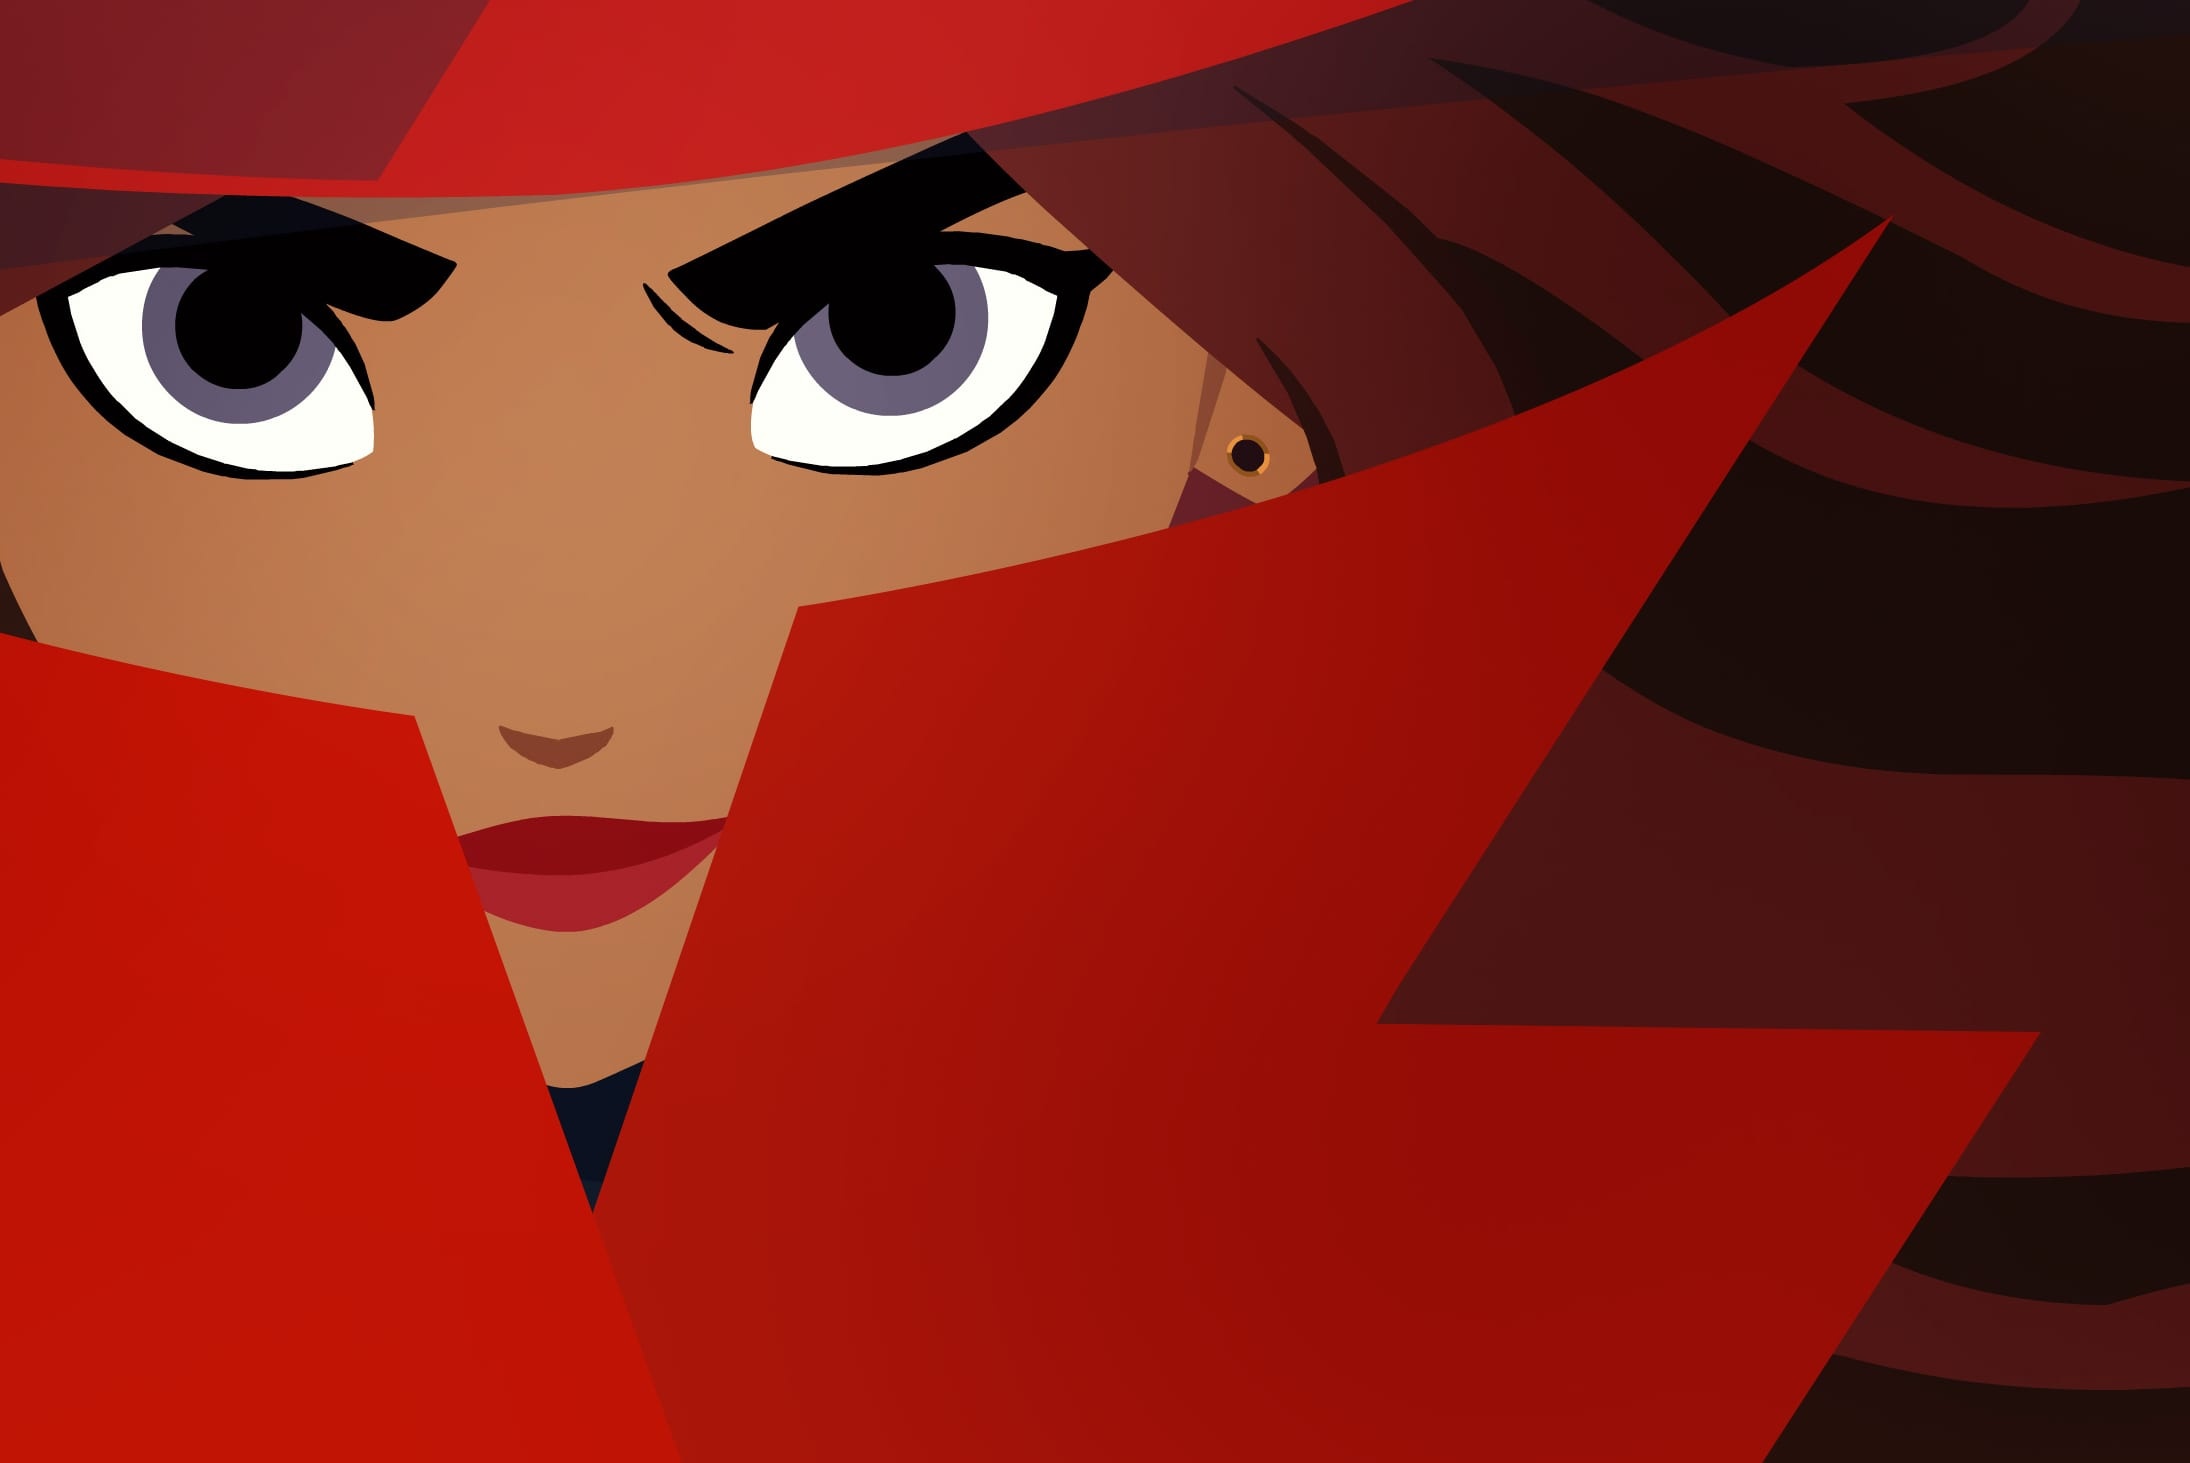 Carmen Sandiego: Netflix series, based on the media franchise of the same name created by Broderbund. 2190x1470 HD Wallpaper.